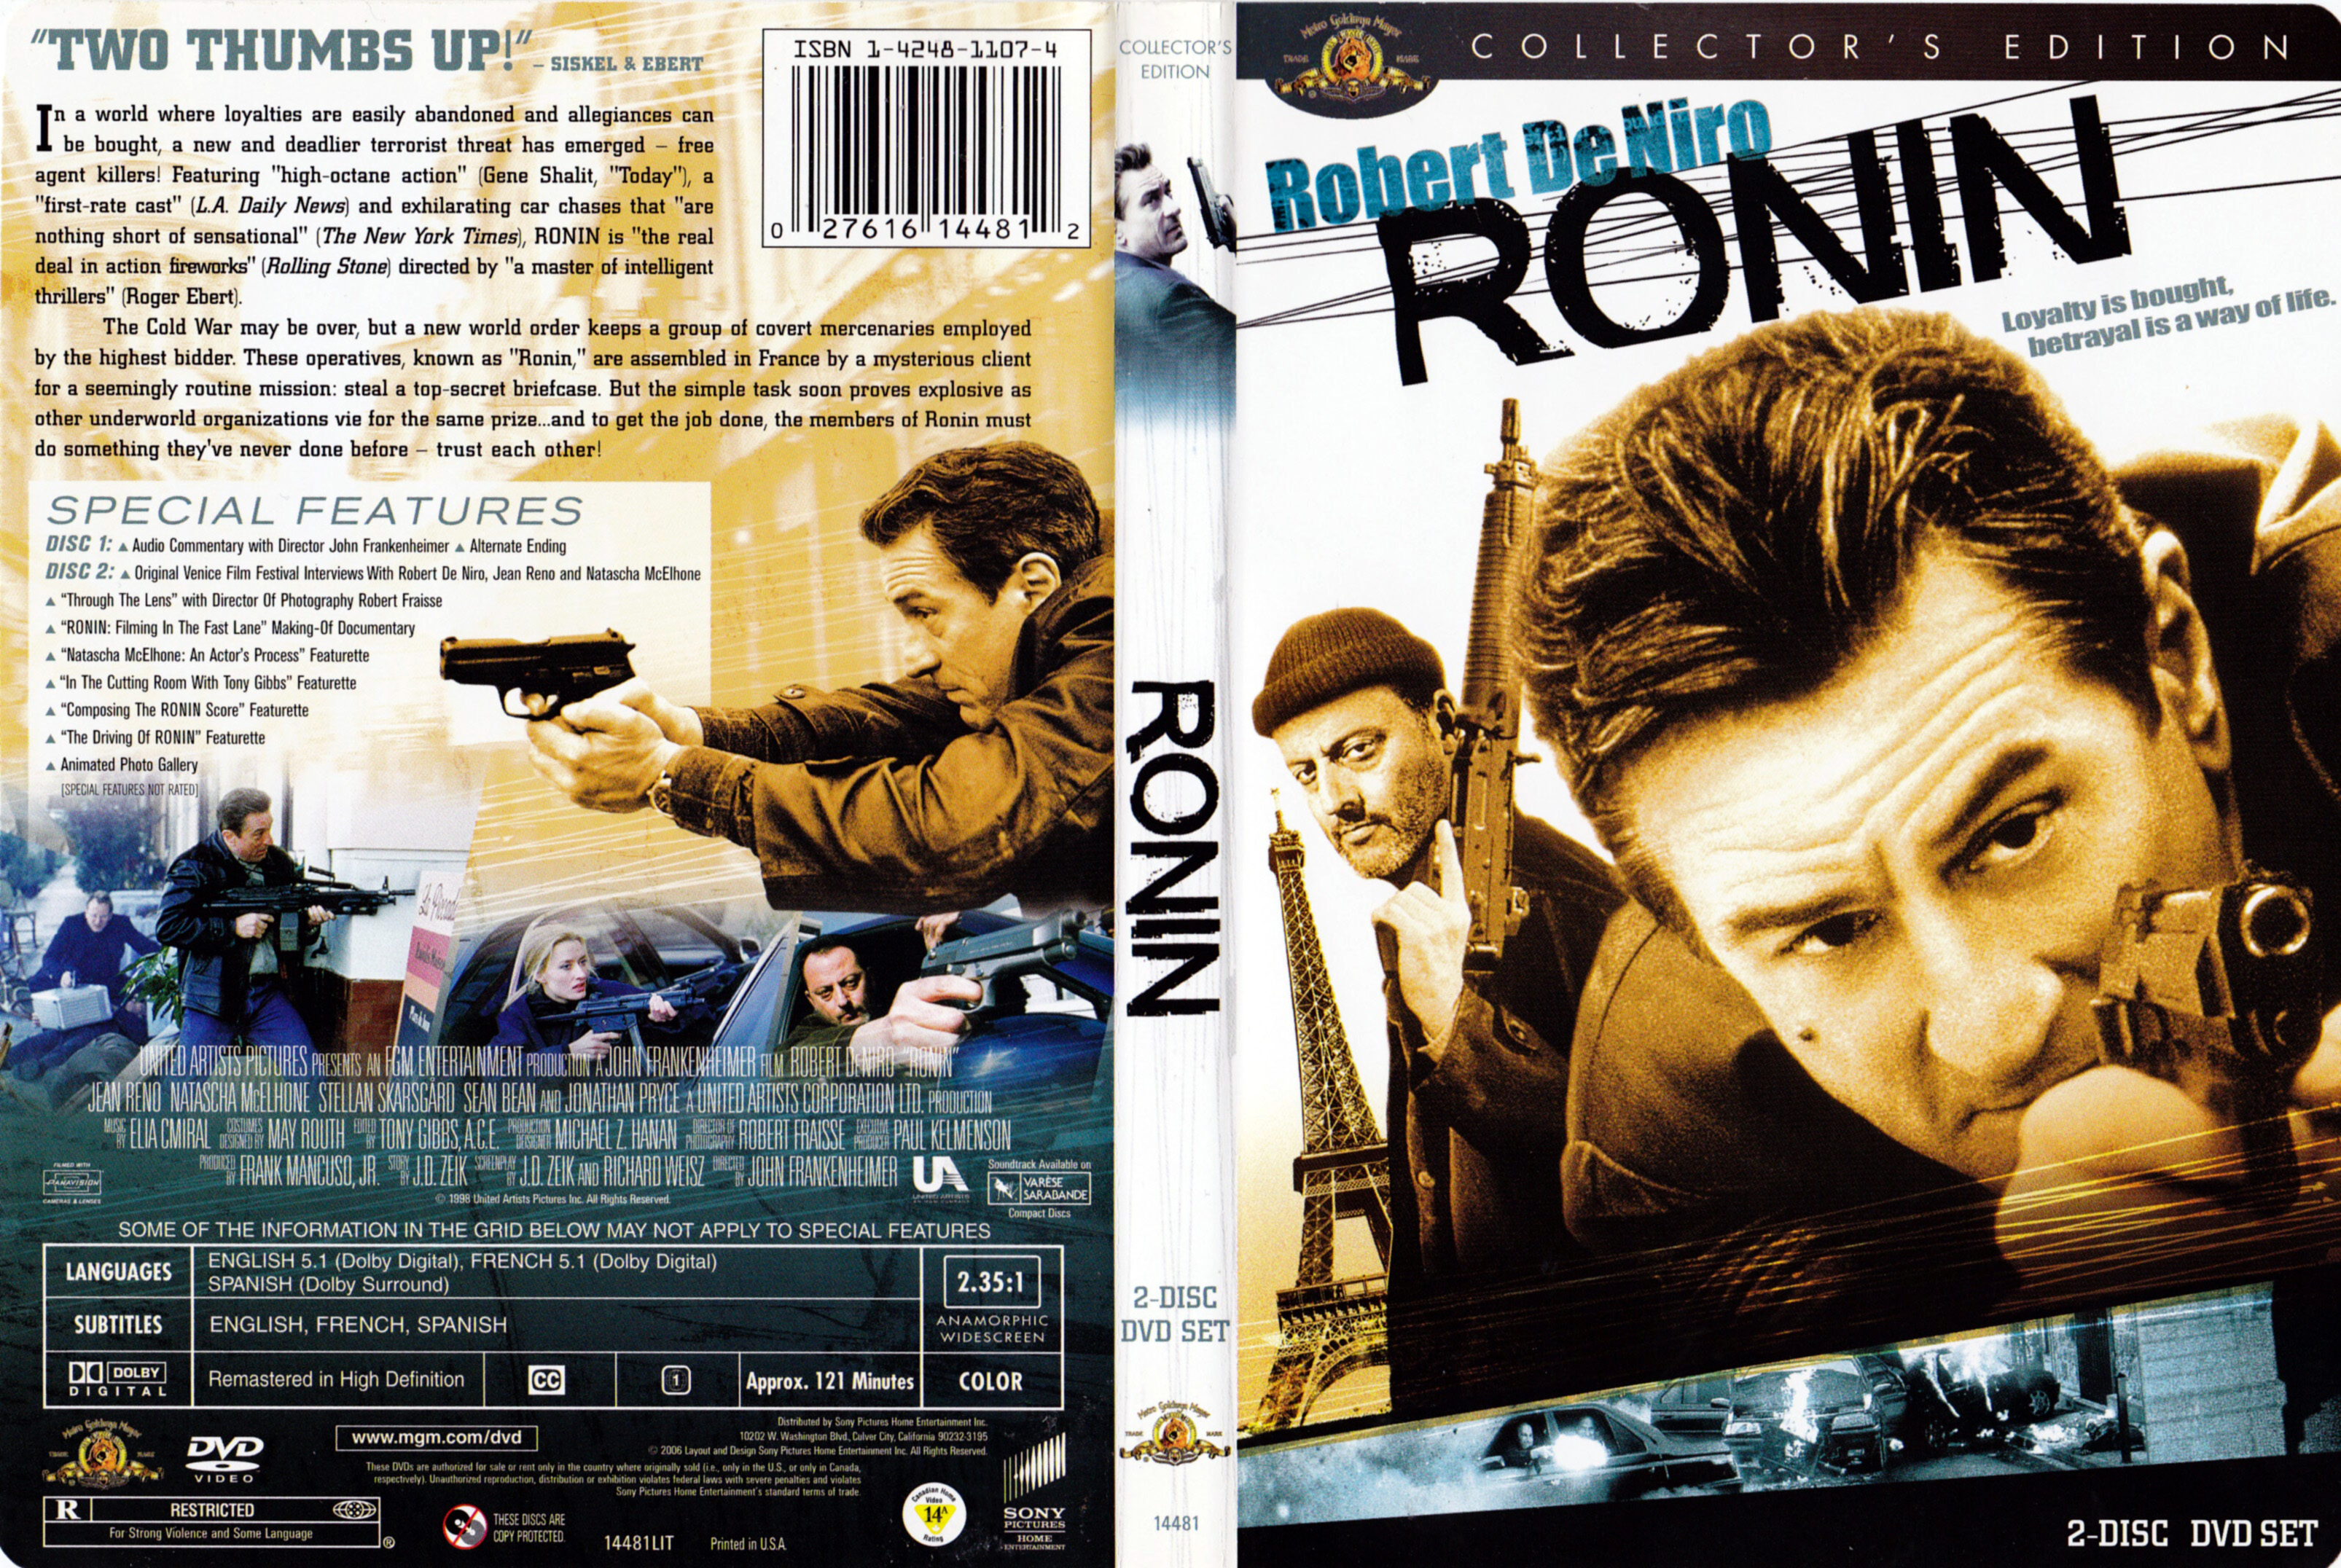 Jaquette DVD Ronin (Canadienne)